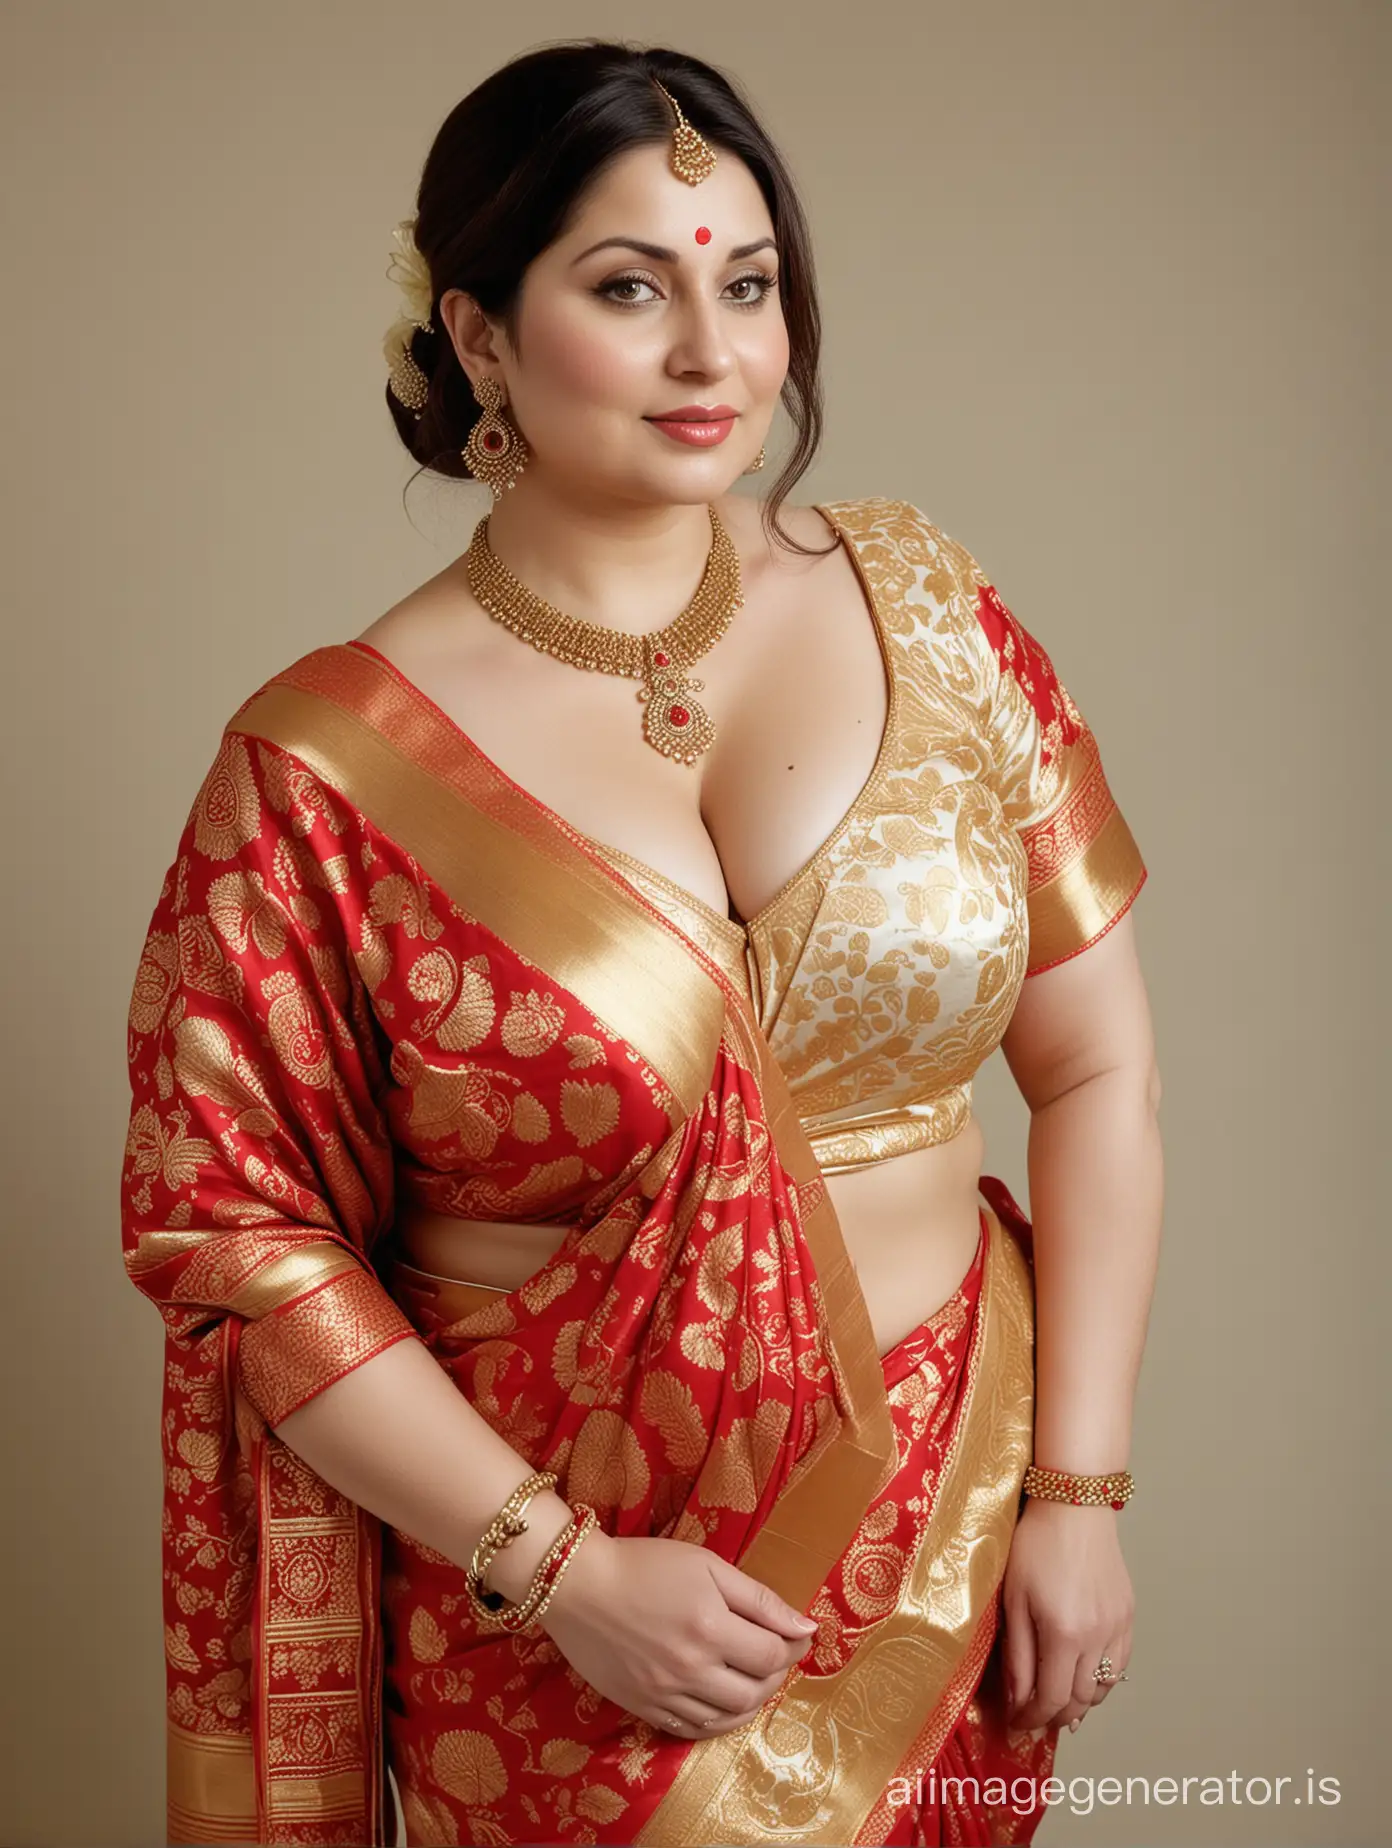 Generate full body  image of a 41 year old very busty breast , big thighs, big arm, big ass and curvy completely  American mature fatty chubby fair white skin woman wearing banarasi saree and wearing sindur in forehead and red and white bangles in hand and wearing gold necklace with gold jewelry